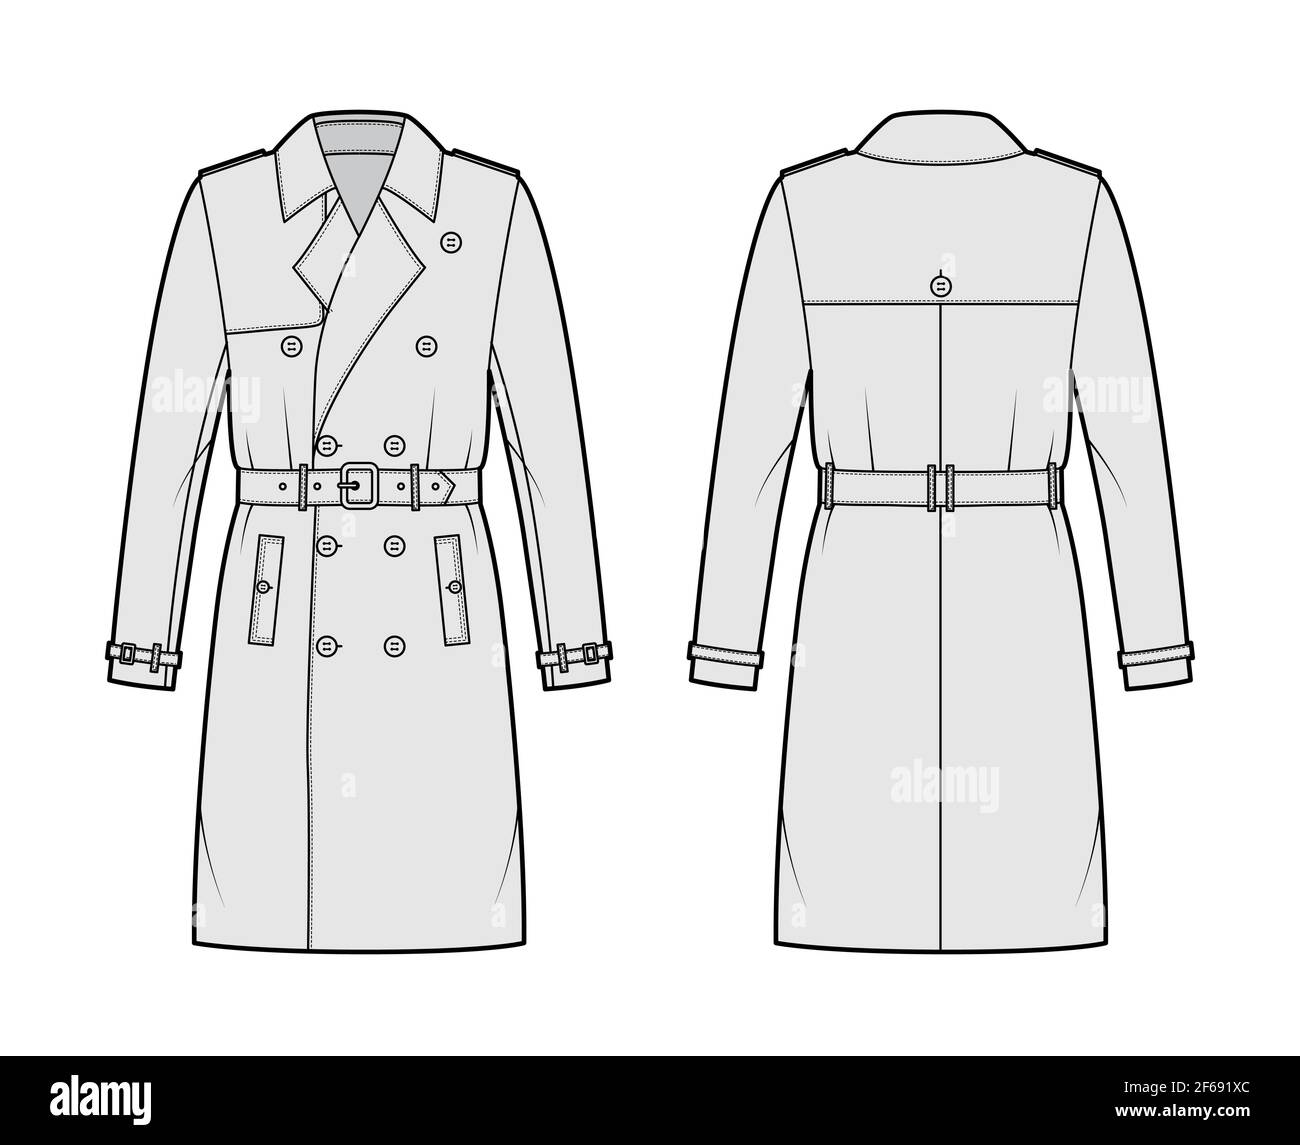 Trench coat technical fashion illustration with belt, double breasted, long sleeves, knee length, storm flap. Flat jacket template front, back, grey color style. Women, men, unisex top CAD mockup Stock Vector